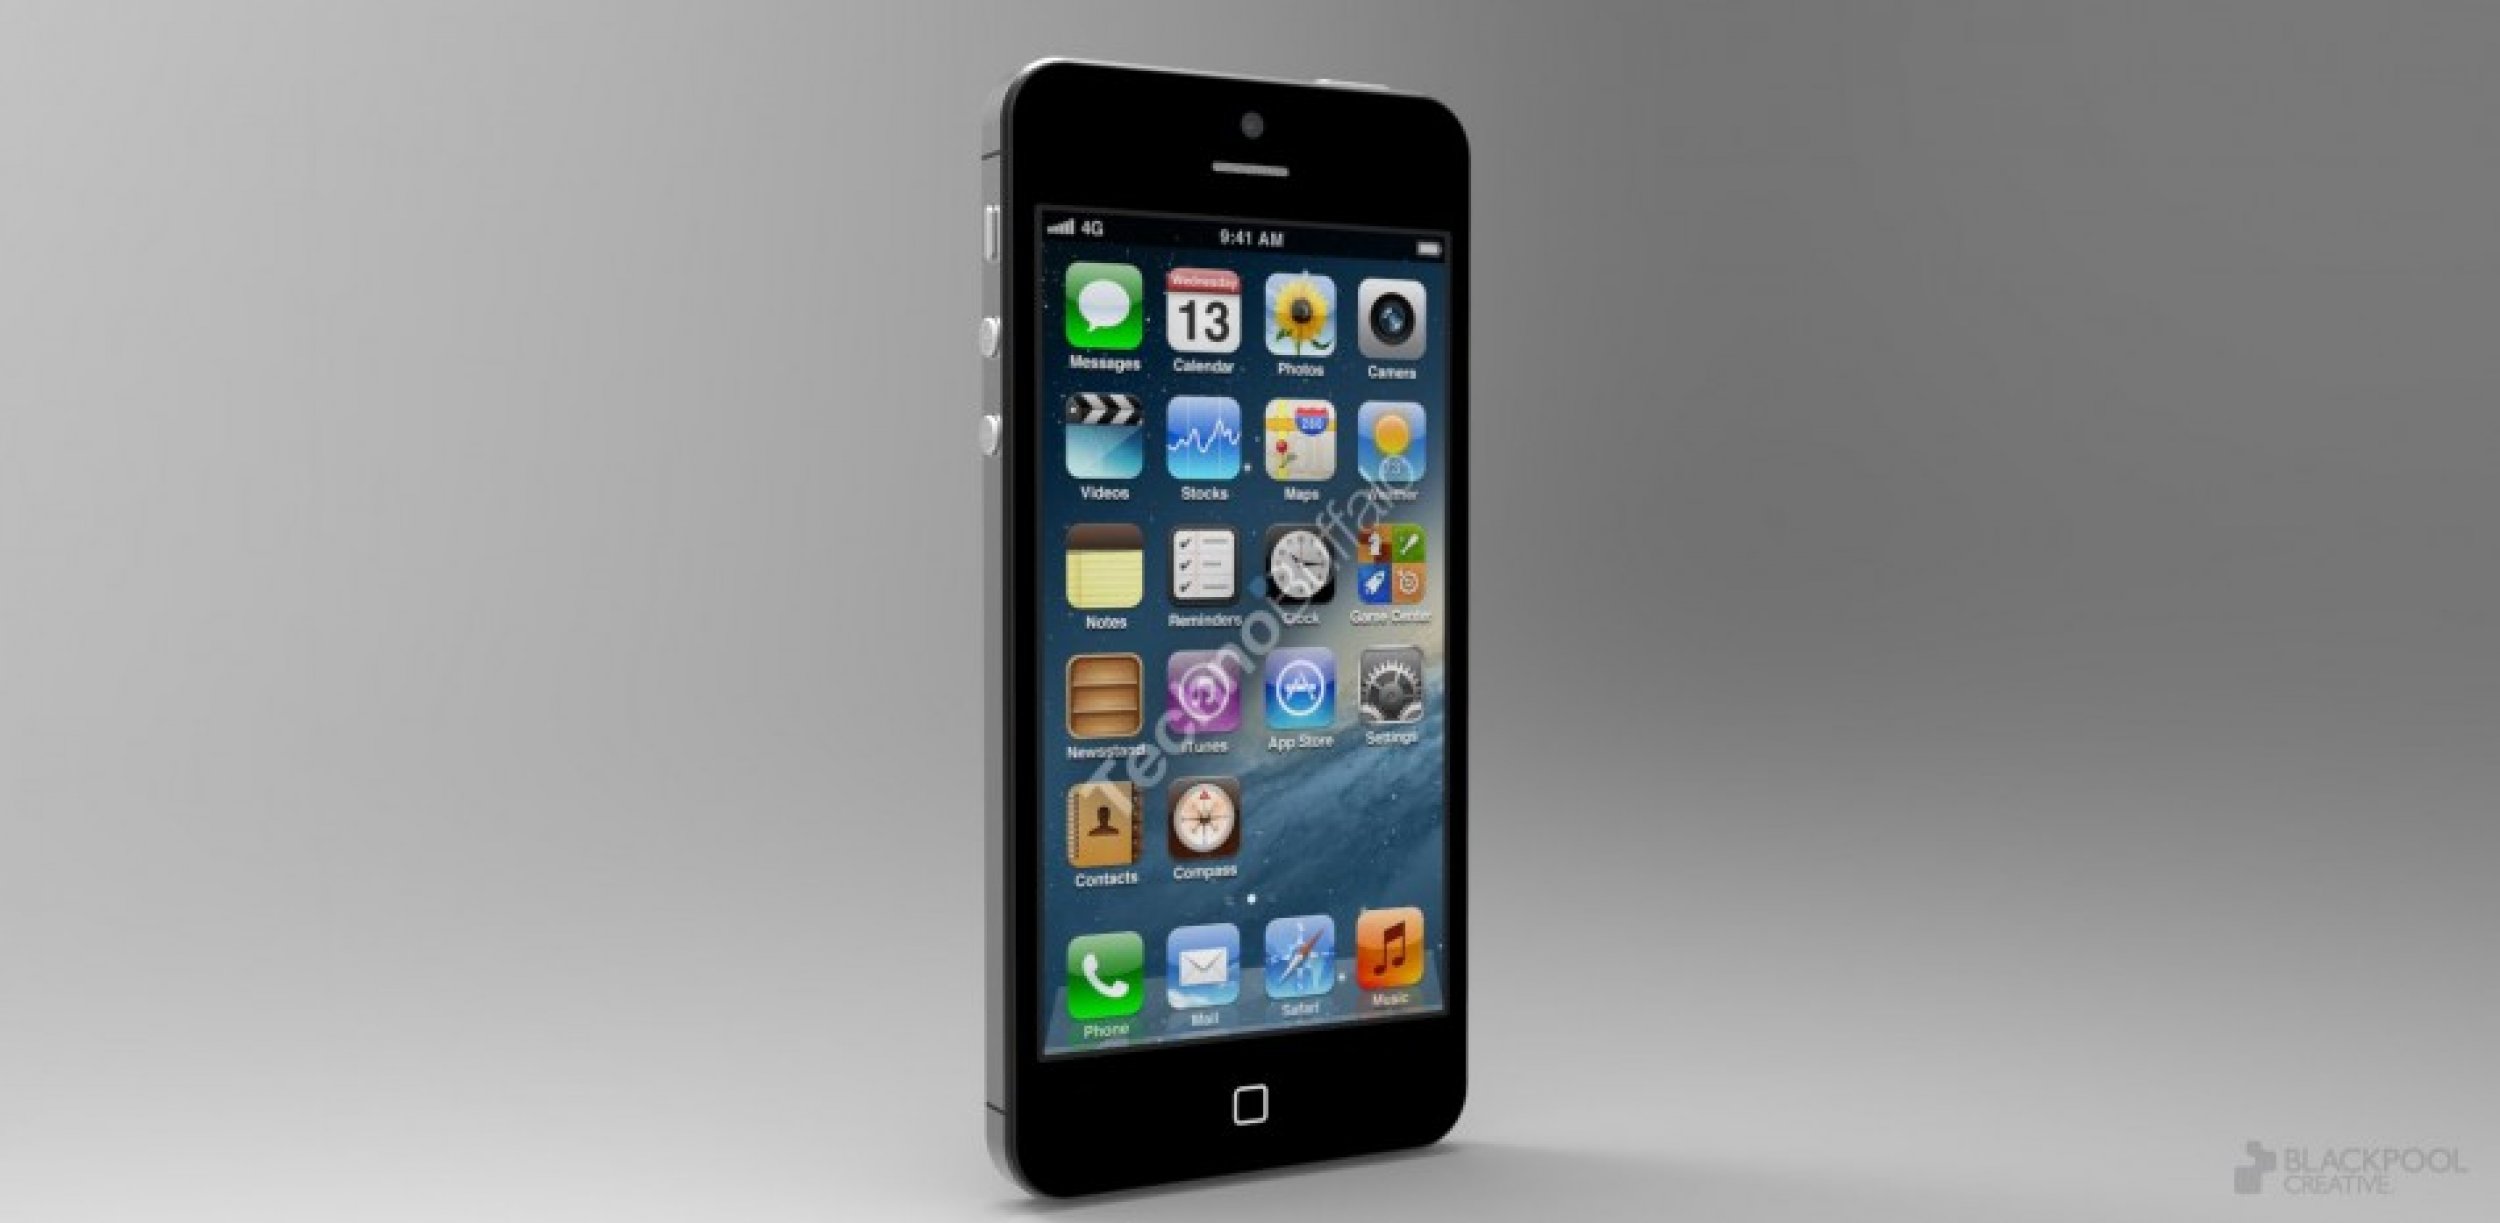 High Resolution 3D Renderings of Next iPhone Based on Leaked Parts Make Rumors Alive